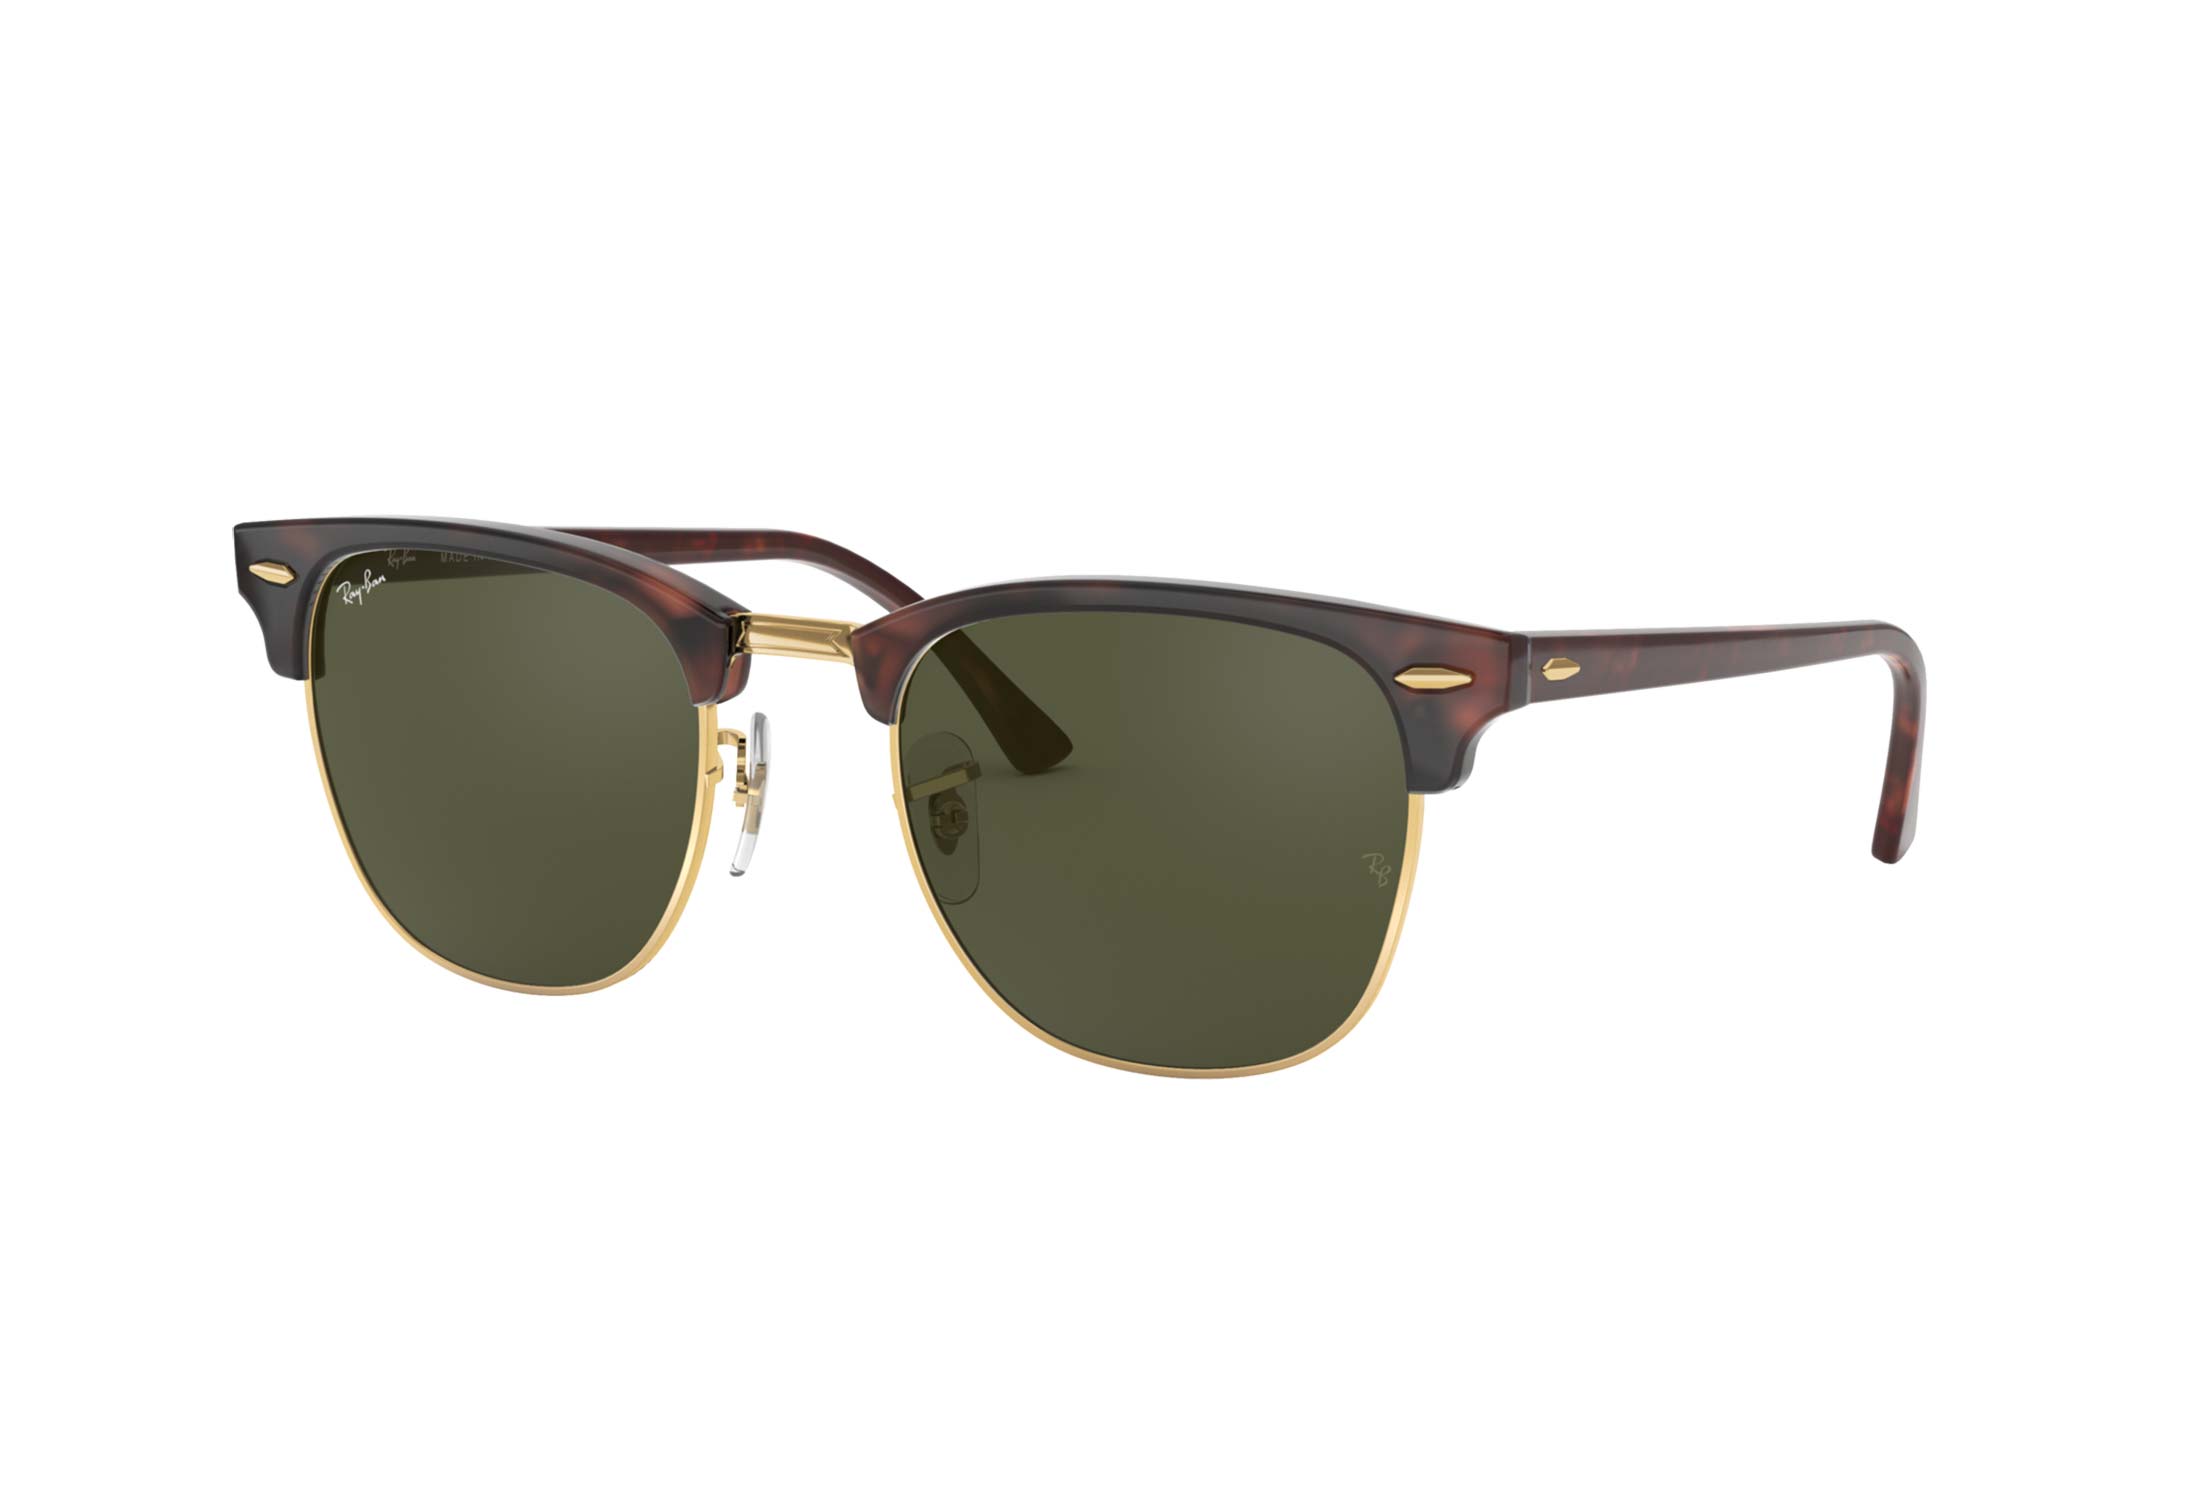 Ray-Ban Clubmaster rb3016 w0366 - Green